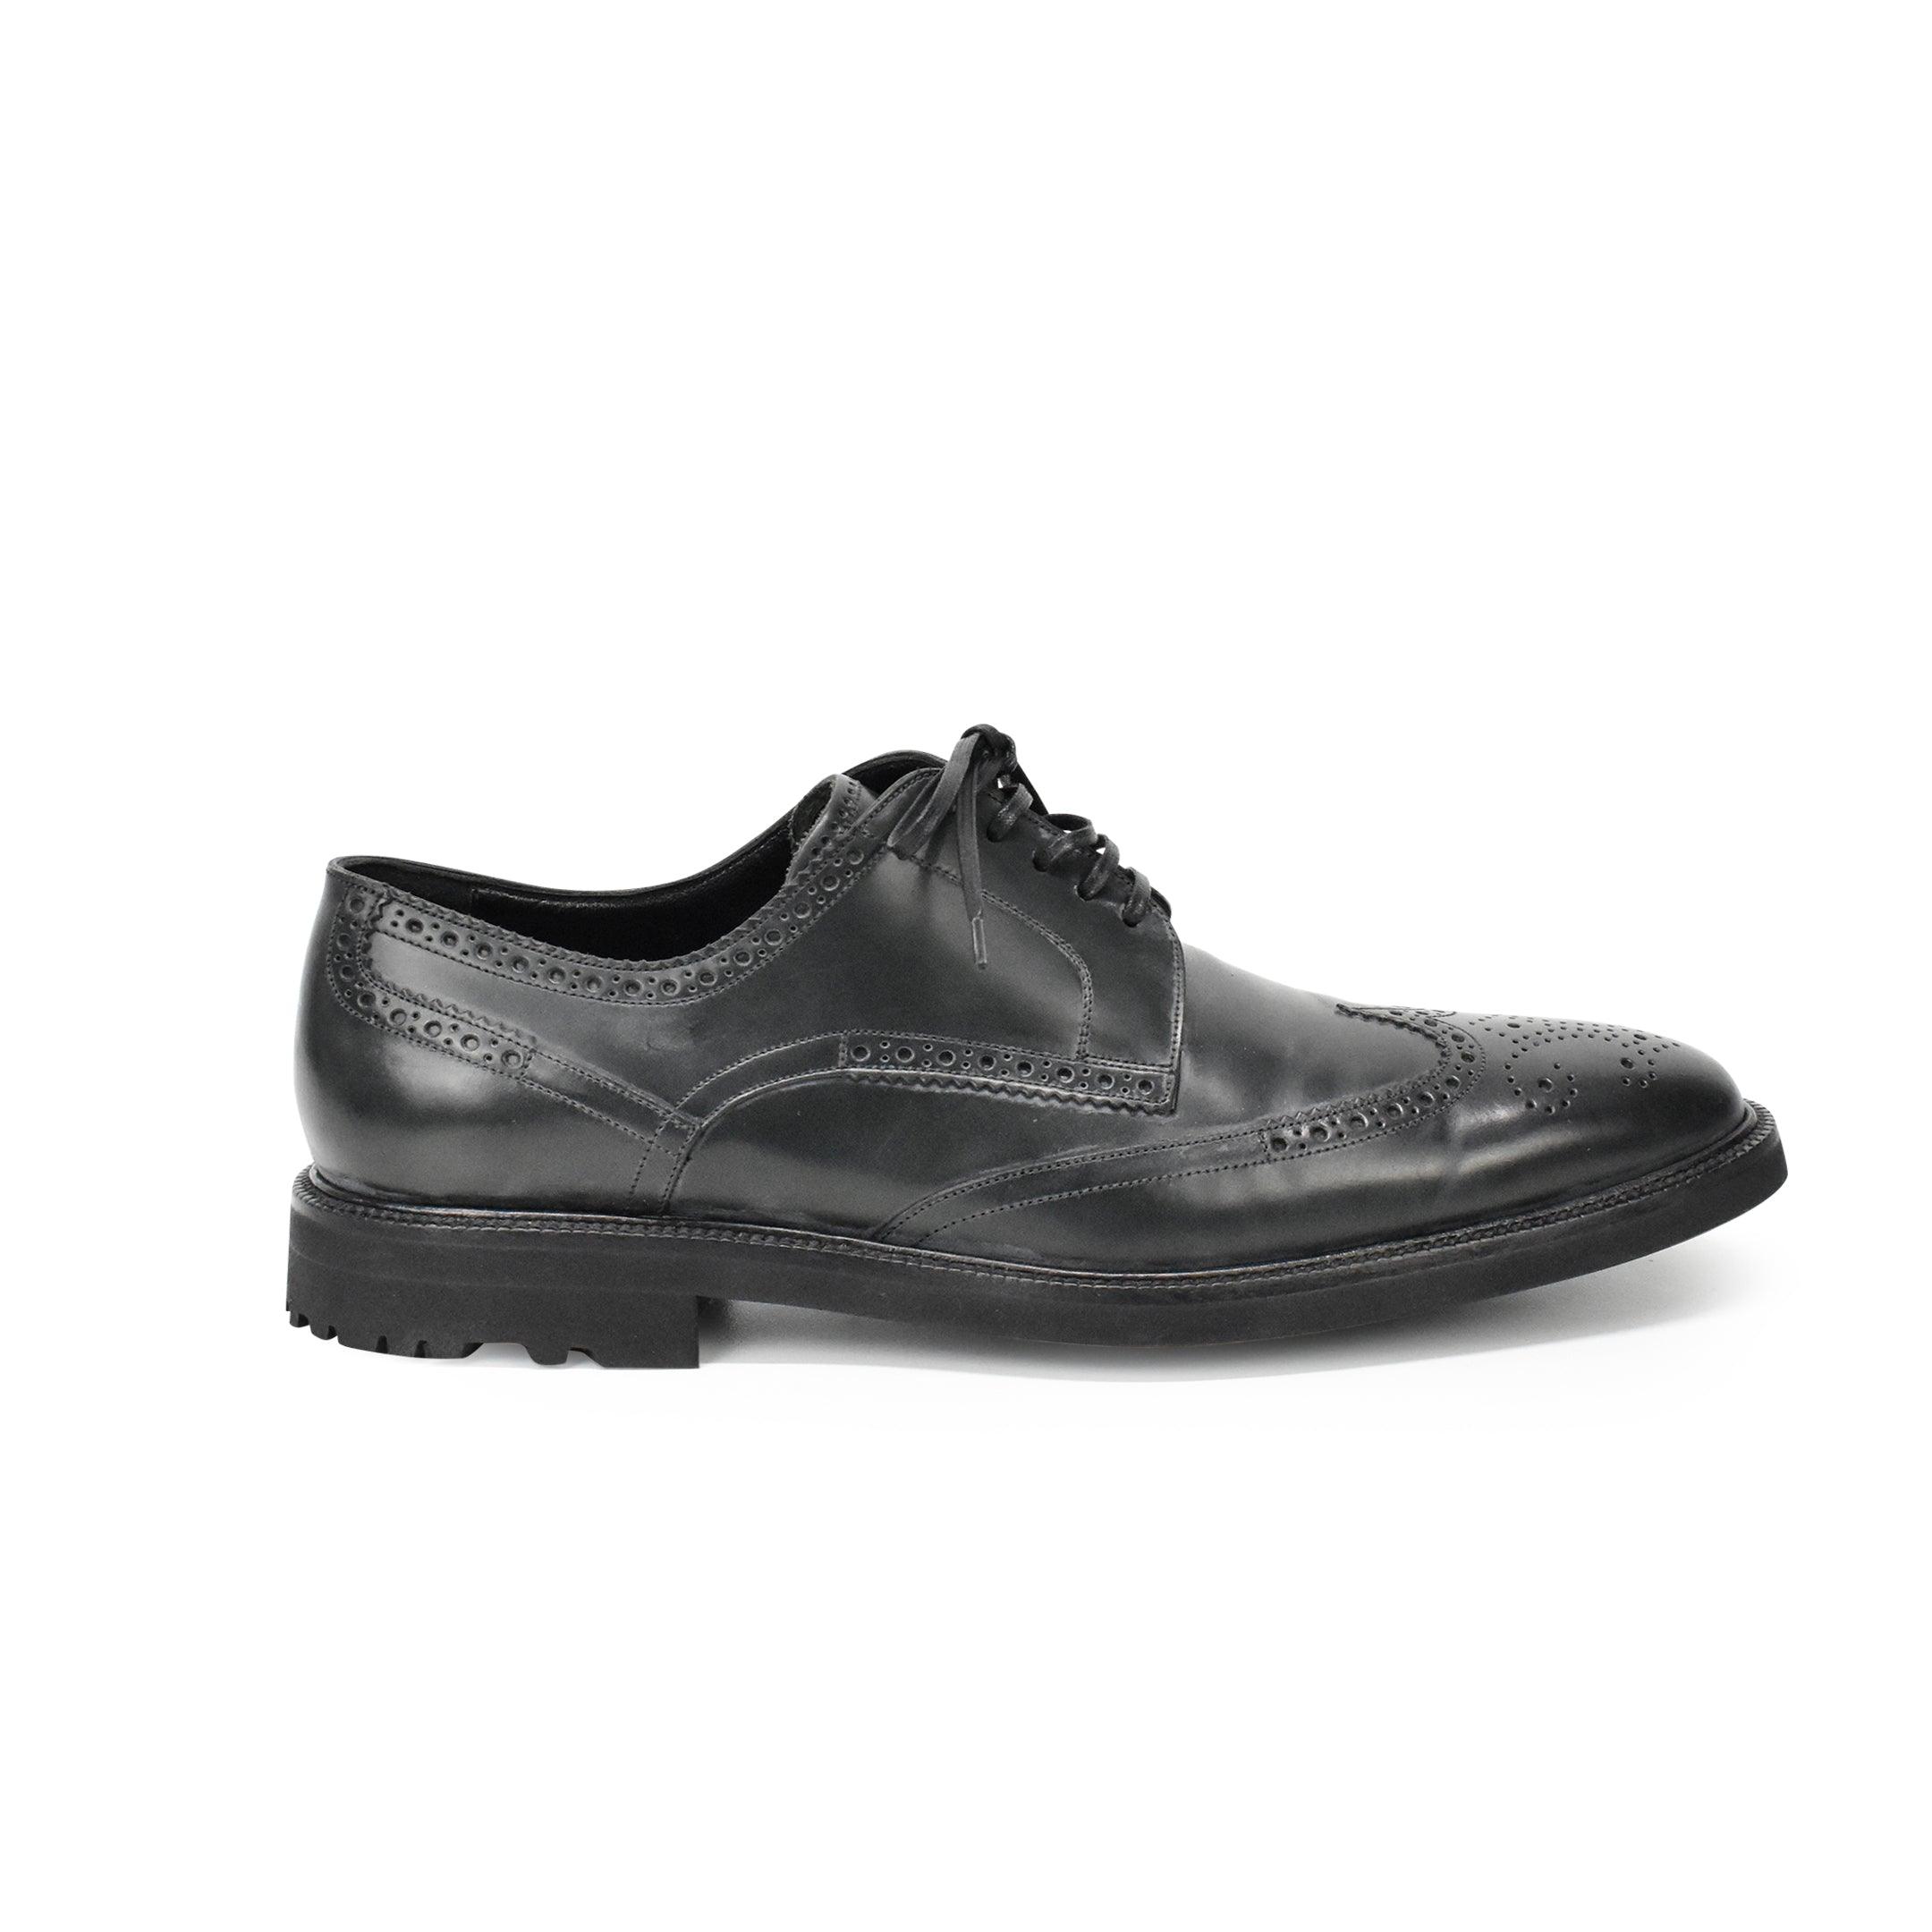 Dolce & Gabbana Oxford Dress Shoes - Men's 9.5 - Fashionably Yours